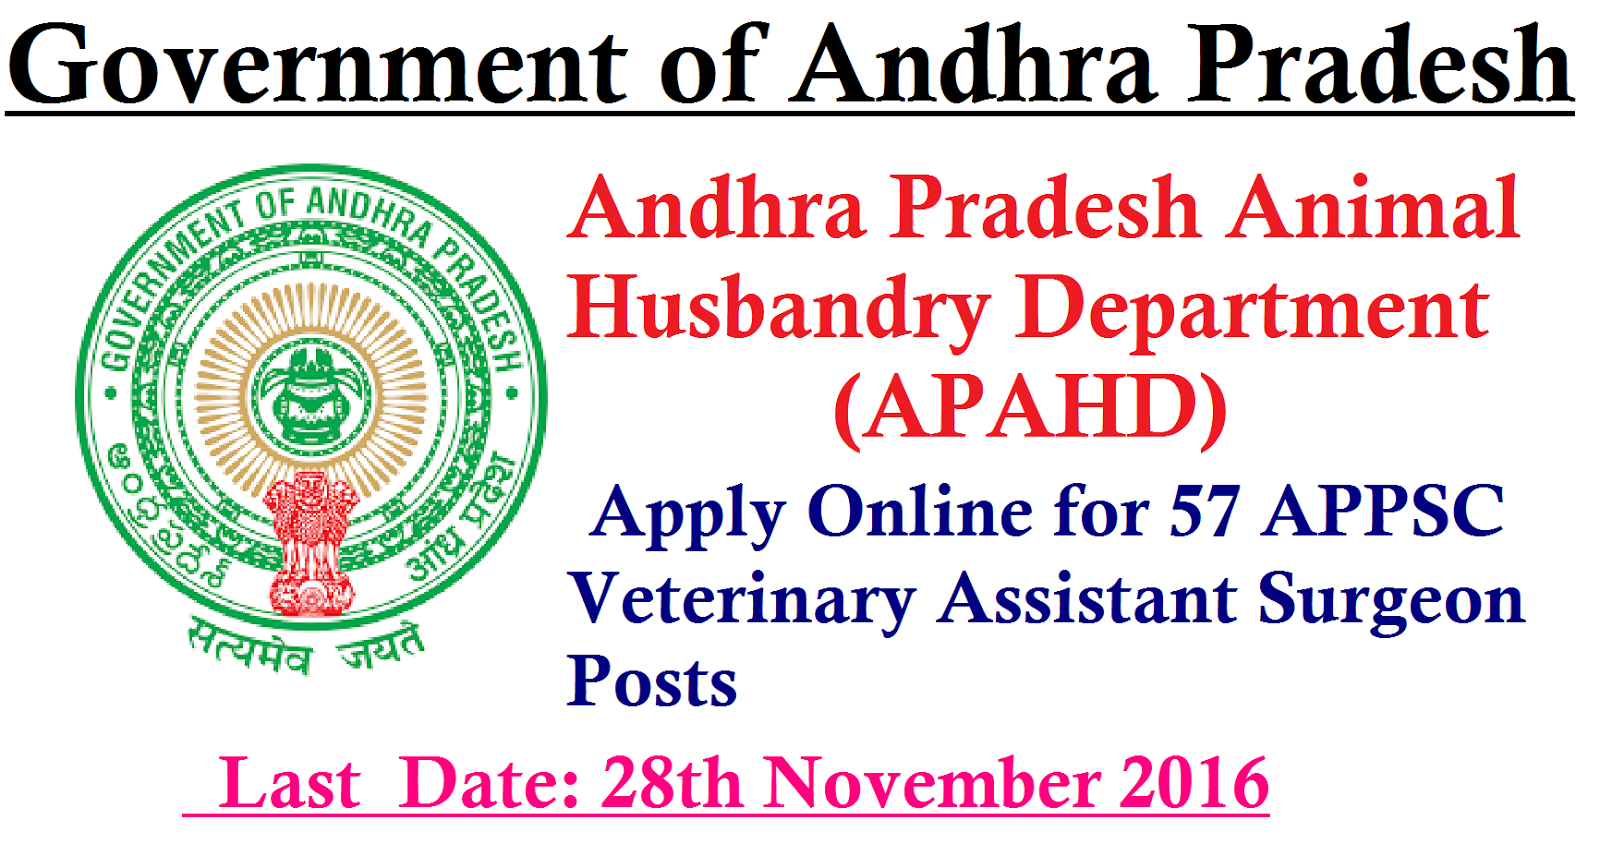 APAHD Recruitment 2016 Apply Online 57 APPSC Veterinary Assistant Surgeon  Posts - TS TET Online Application Avanigadda Study Material Download